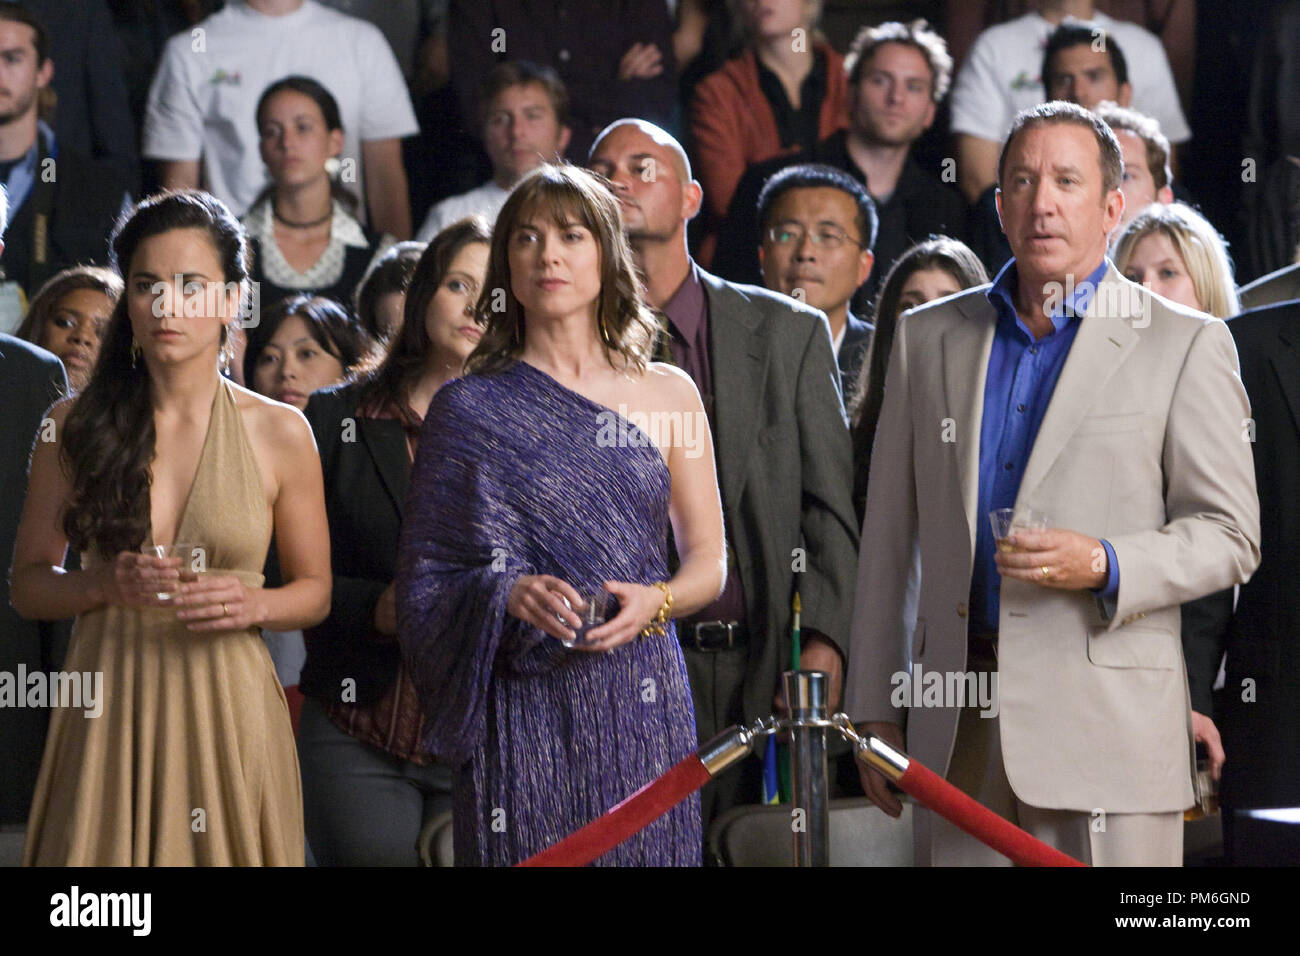 Film Still from 'Redbelt' Tim Allen, Alice Braga, Rebecca Pidgeon © 2008 Sony Pictures Classics Photo credit: Lorey Sebastian  File Reference # 30755727THA  For Editorial Use Only -  All Rights Reserved Stock Photo